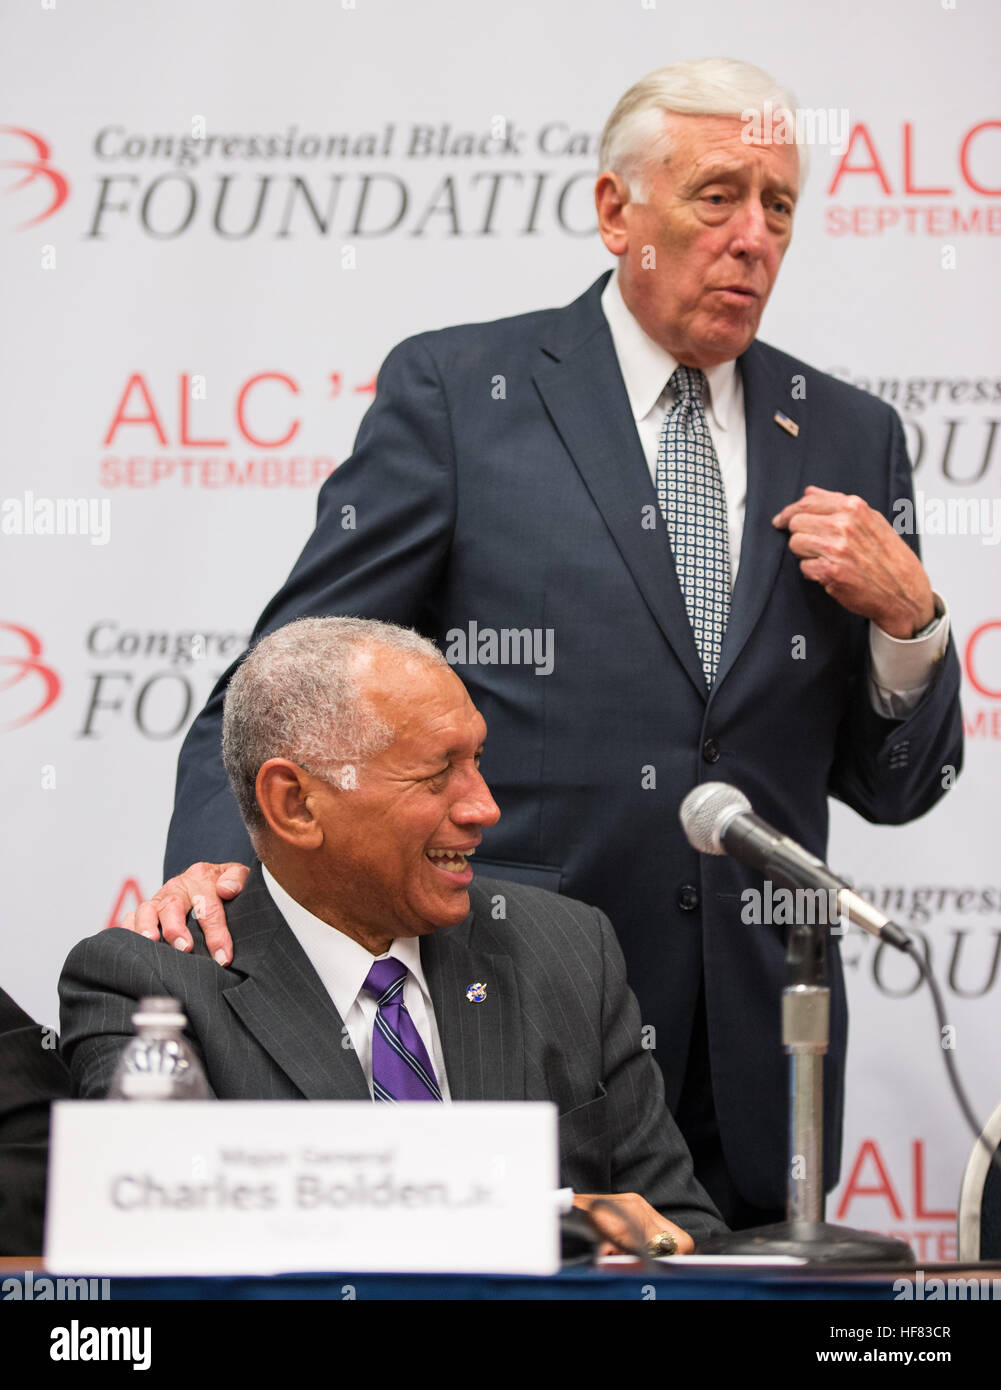 Representative Steny Hoyer (D- Md.) greets NASA Administrator Charles Bolden during a panel on &quot;Women in STEM: A Gender Gap to Innovation&quot; at the Annual Legislative Congress (ALC), held by the Congressional Black Caucus, Thursday, September 15, 2016 at the Washington Convention Center in Washington. Aubrey Gemignani) Stock Photo